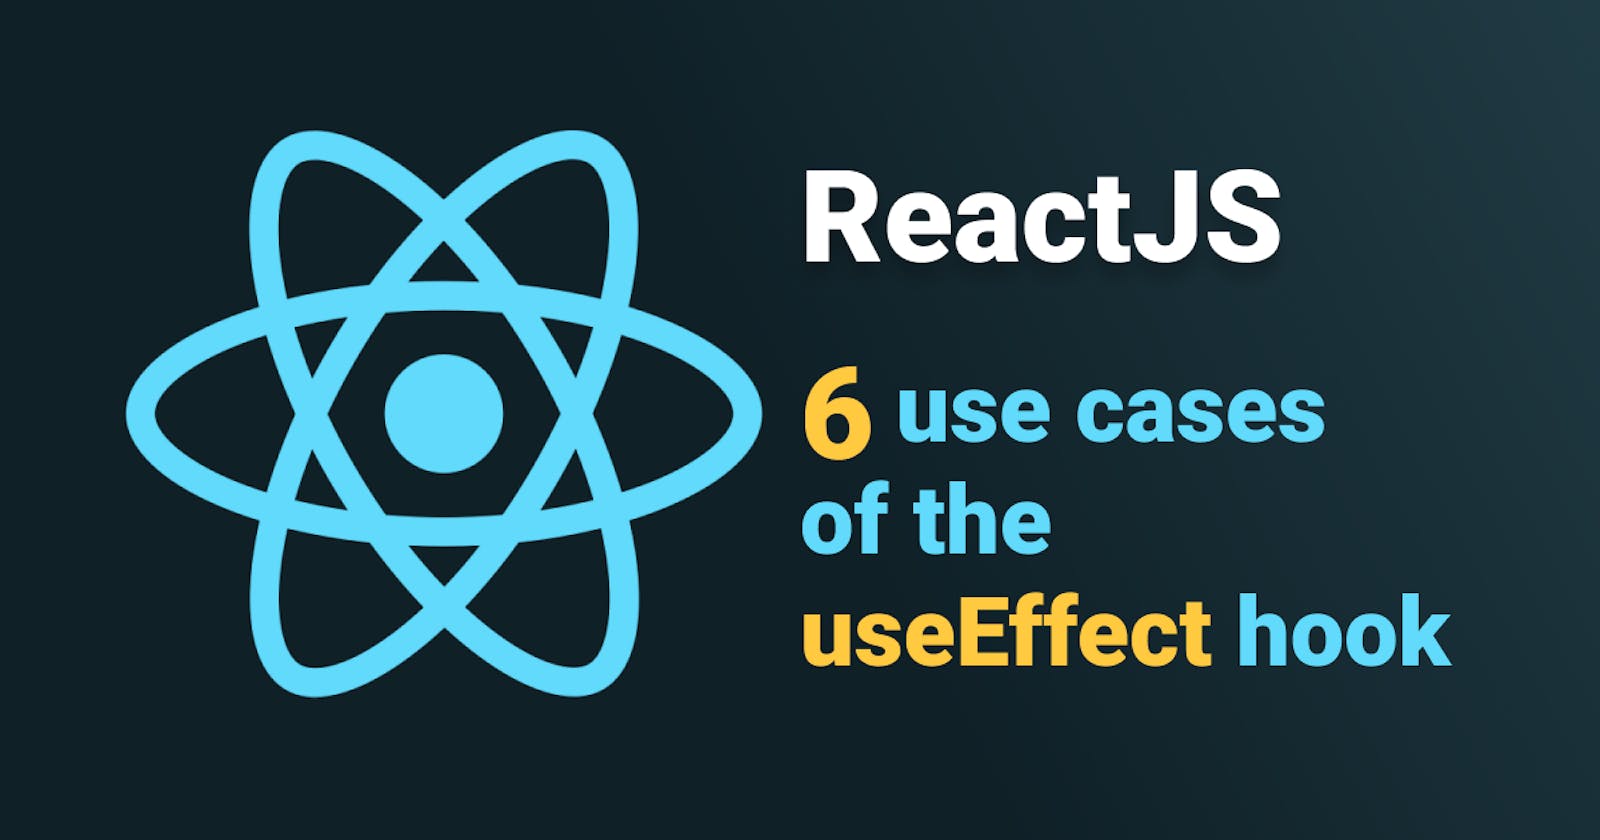 6 use cases of the useEffect ReactJS hook